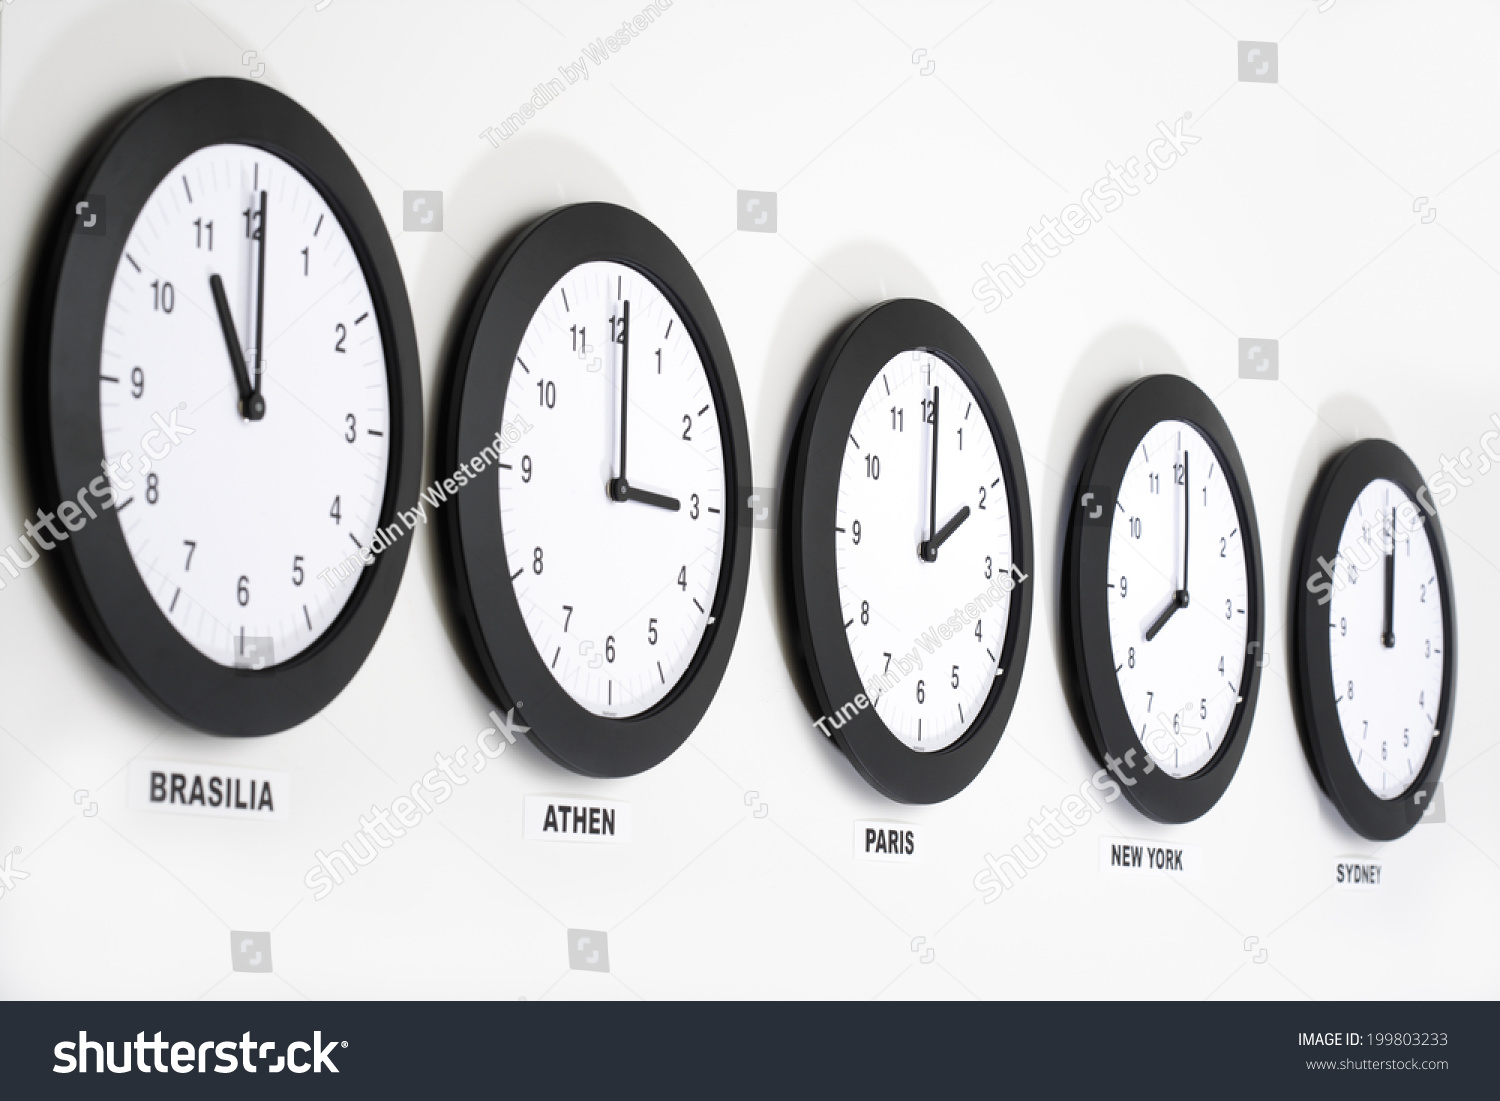 Clocks On Wall, Symbol For Greenwich Mean Time Stock Photo 199803233 ...